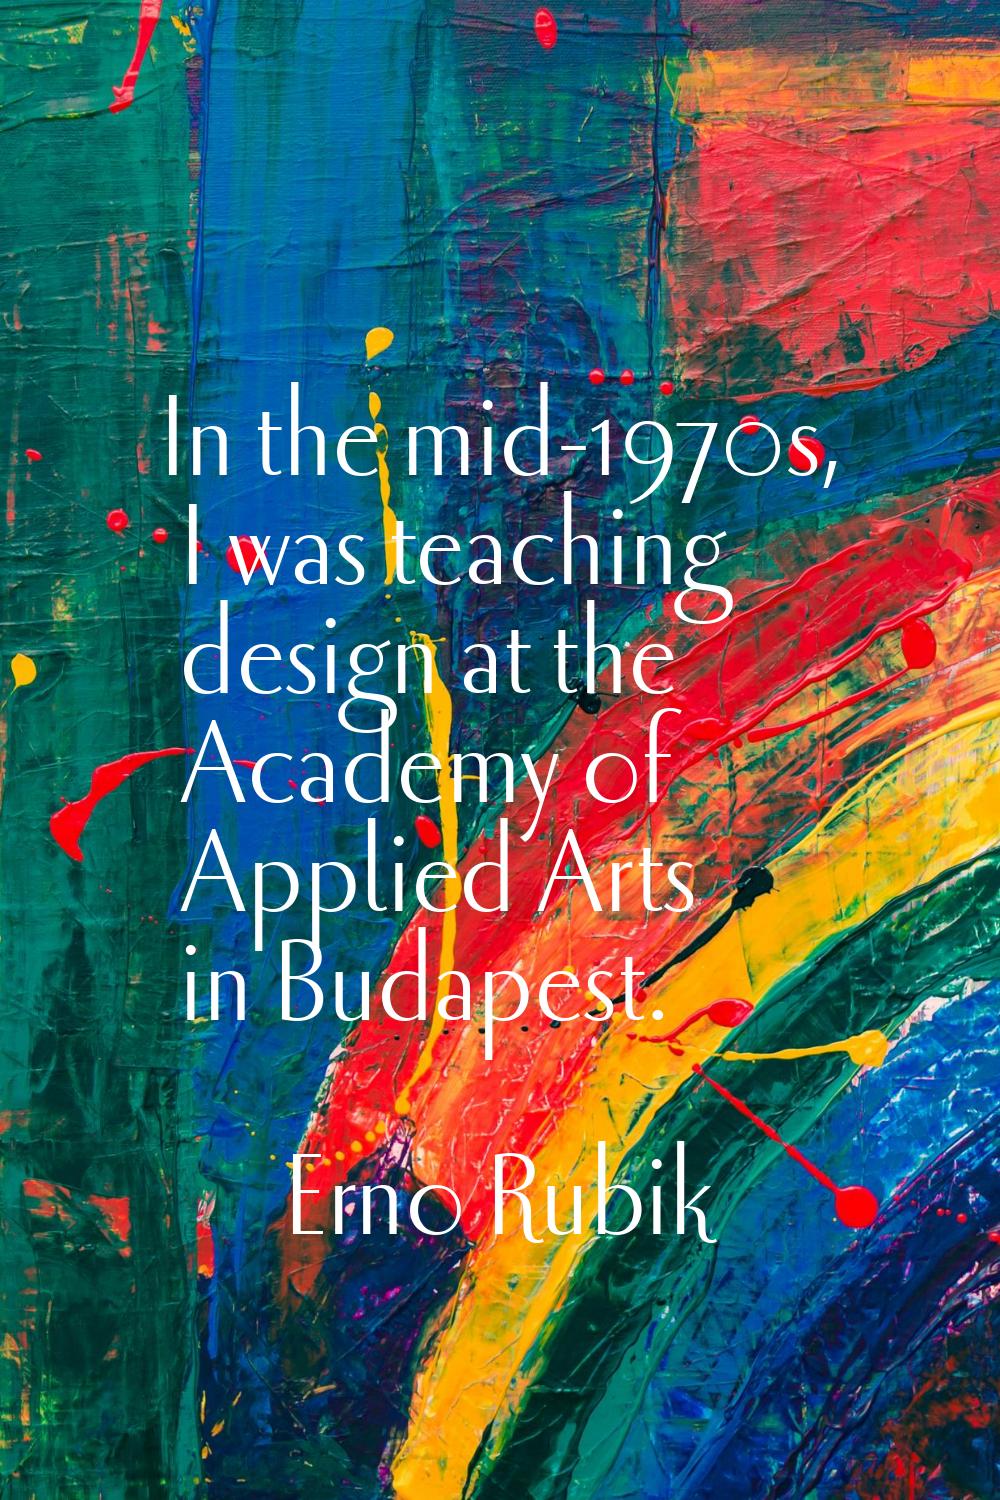 In the mid-1970s, I was teaching design at the Academy of Applied Arts in Budapest.